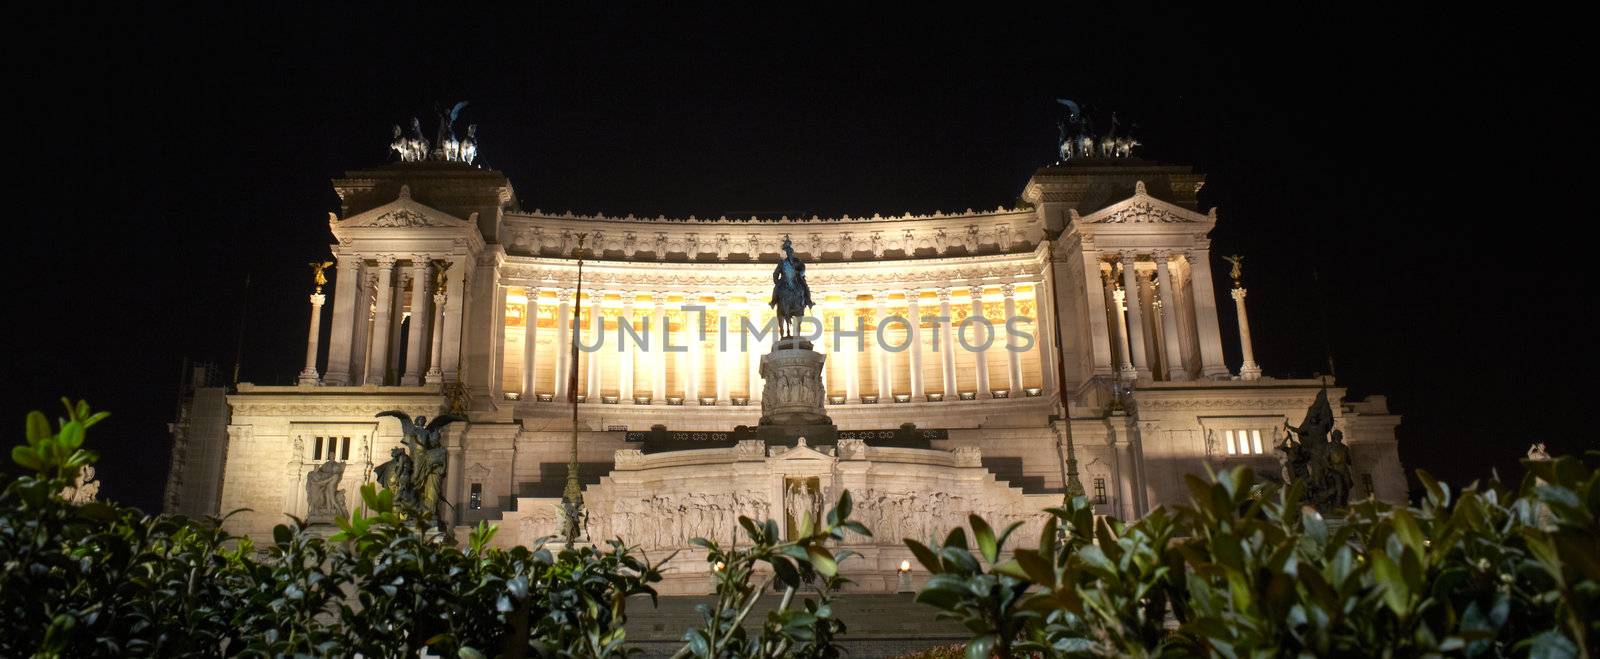 Altare della Patria - The National Monument to Victor Emmanuel II shot at night in Rome, Italy